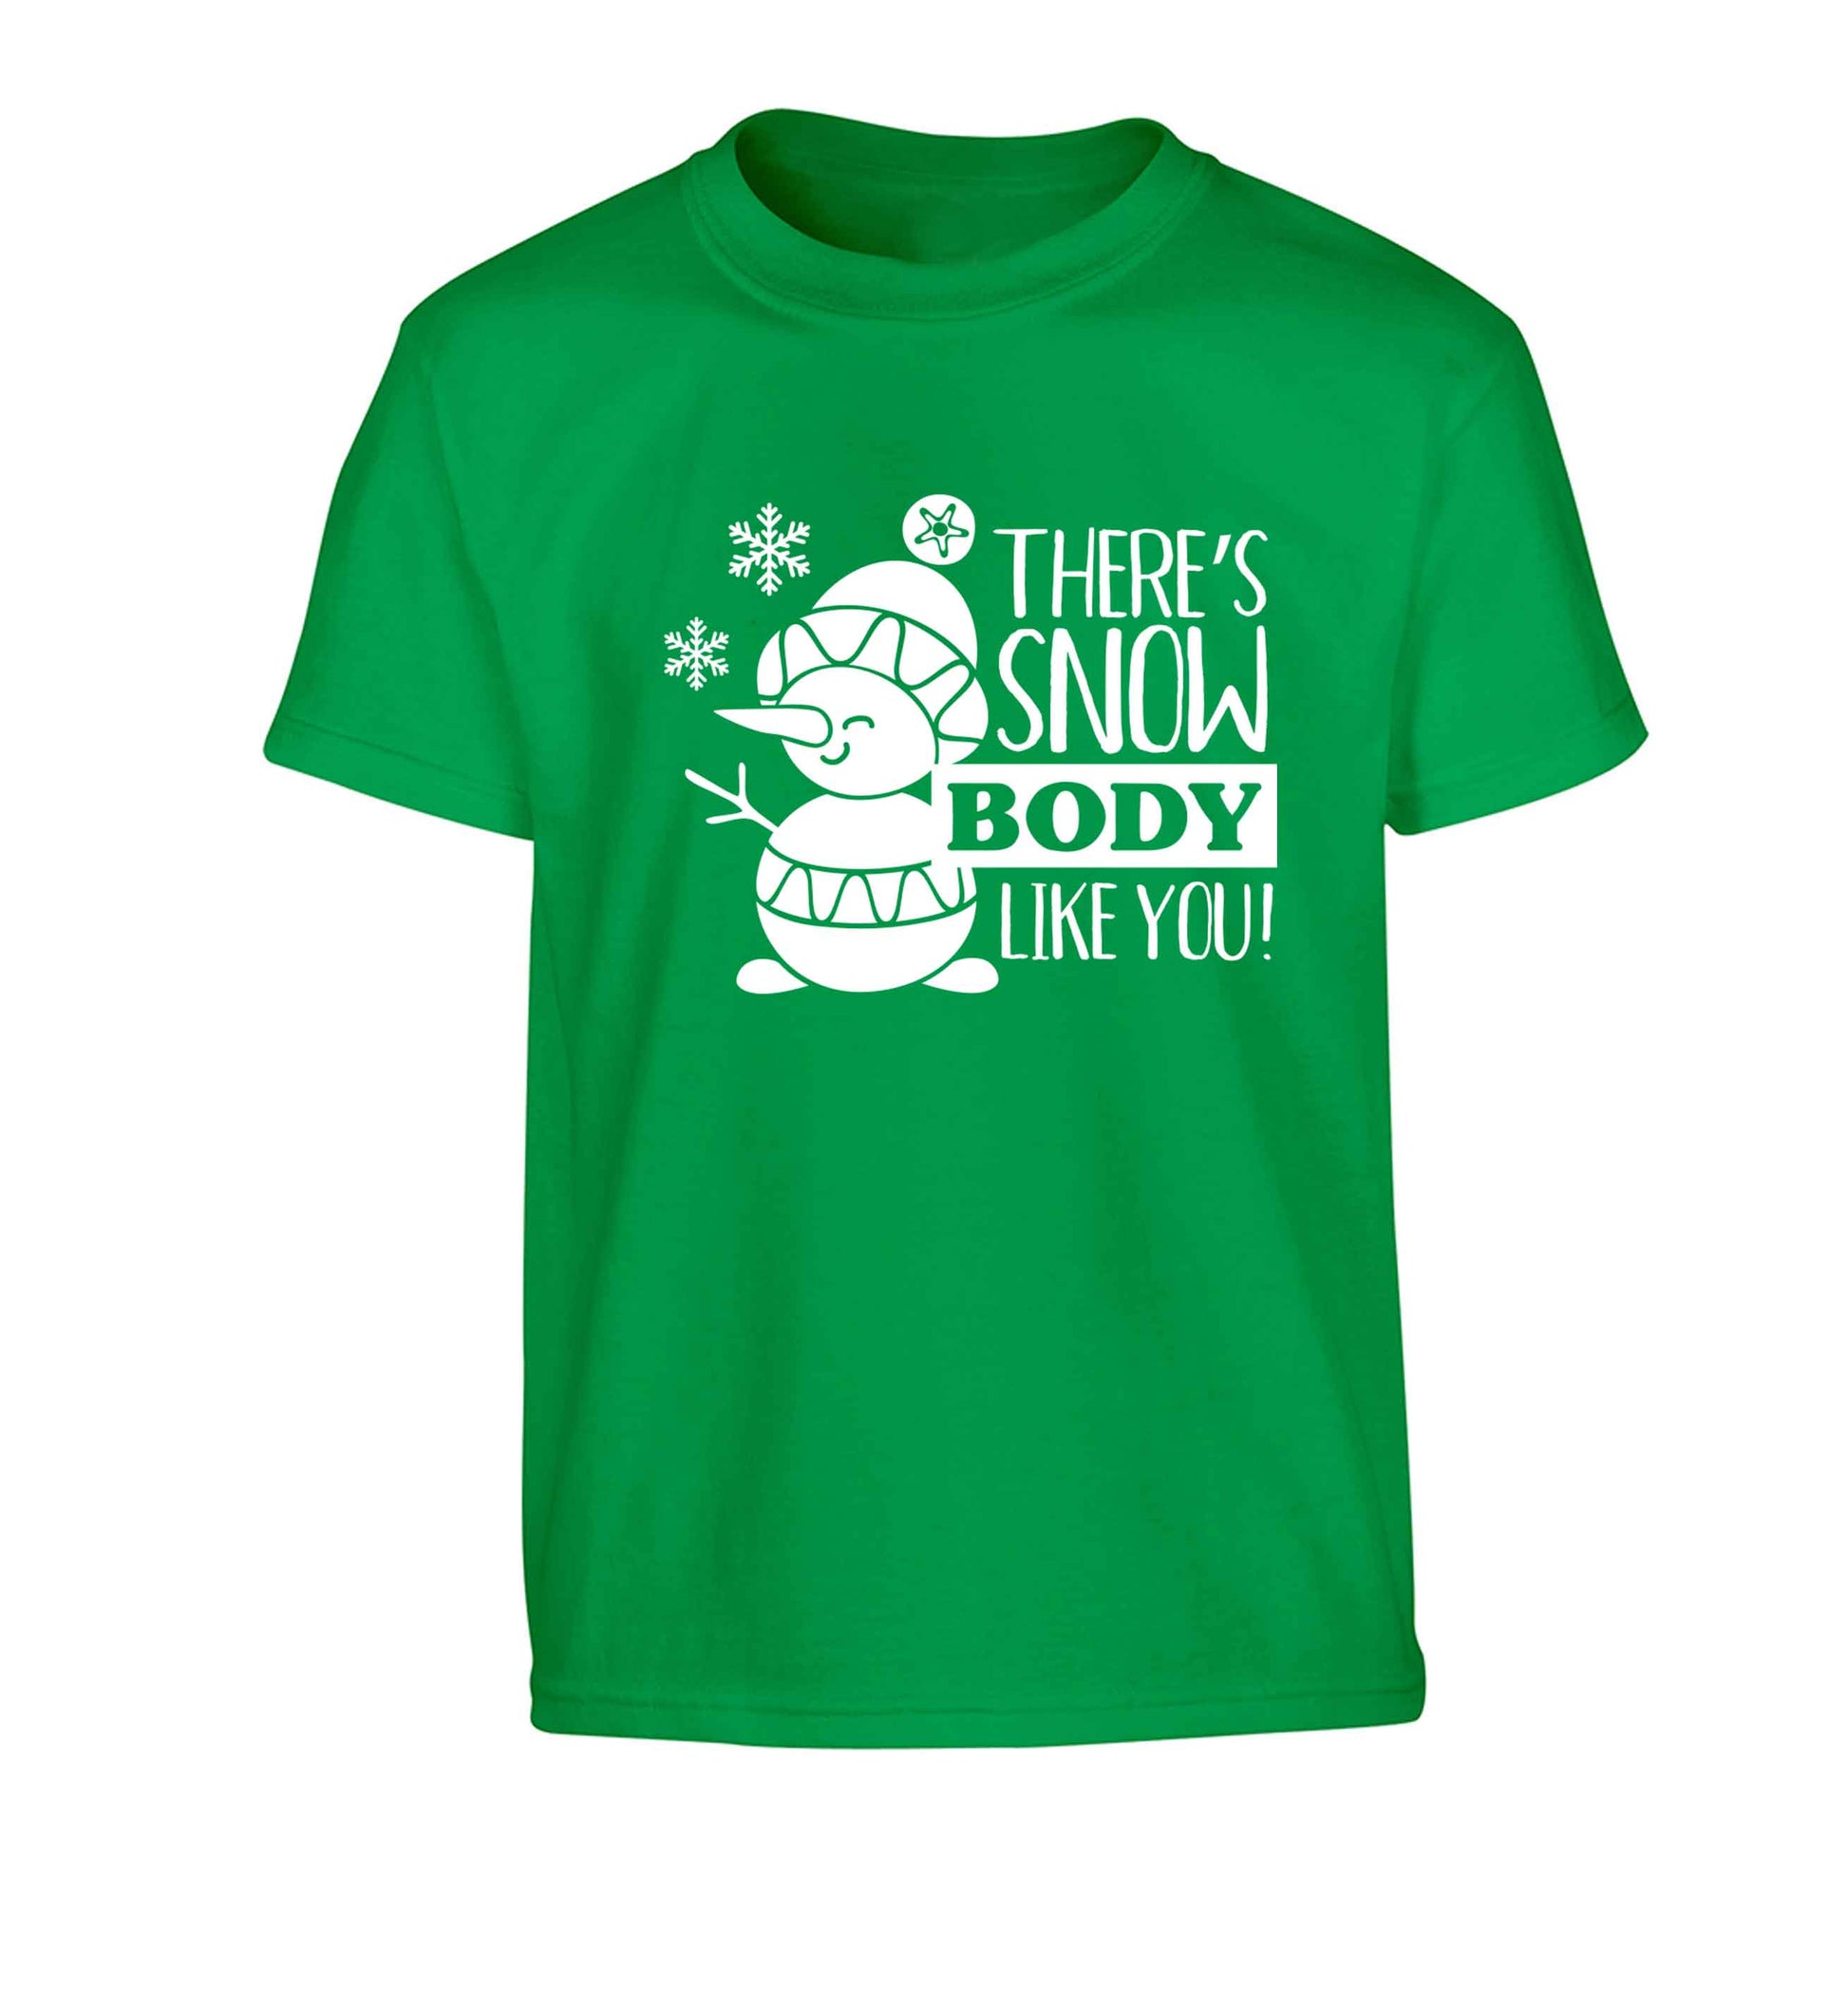 There's snow body like you Children's green Tshirt 12-13 Years